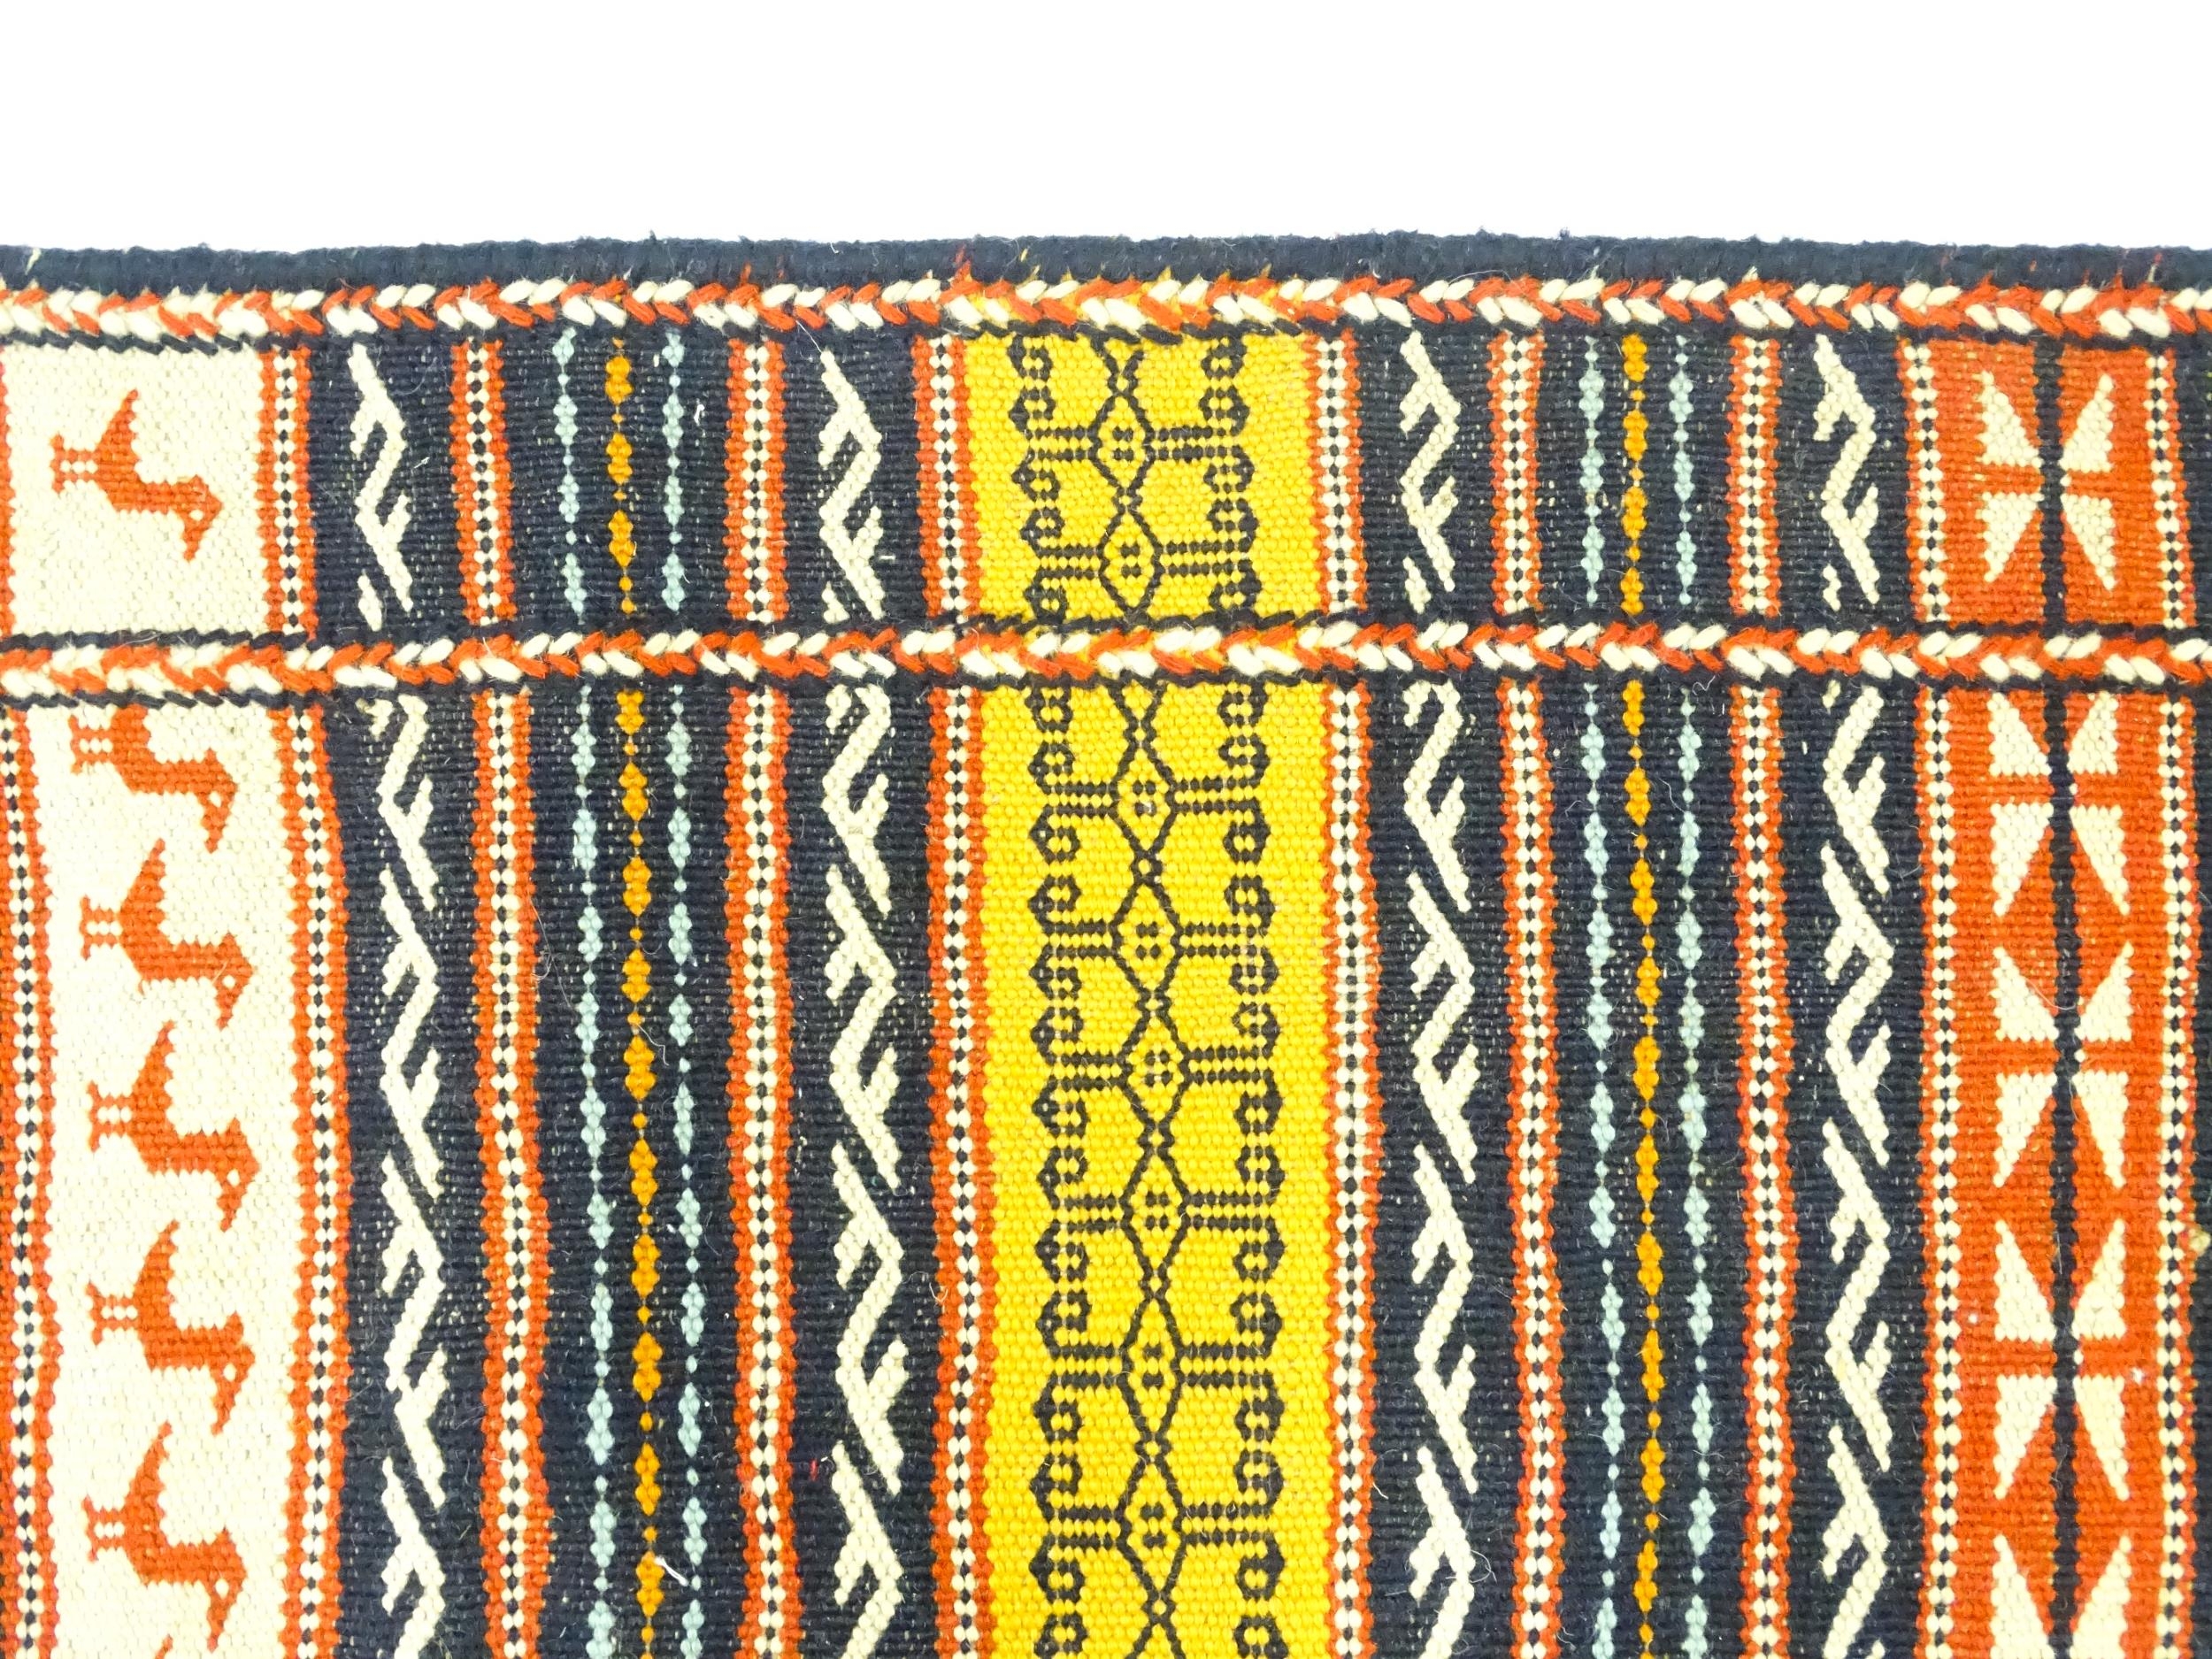 Carpet / Rug : A North East Persian Sumak kilim rug with banded geometric detail and repeating - Image 5 of 11